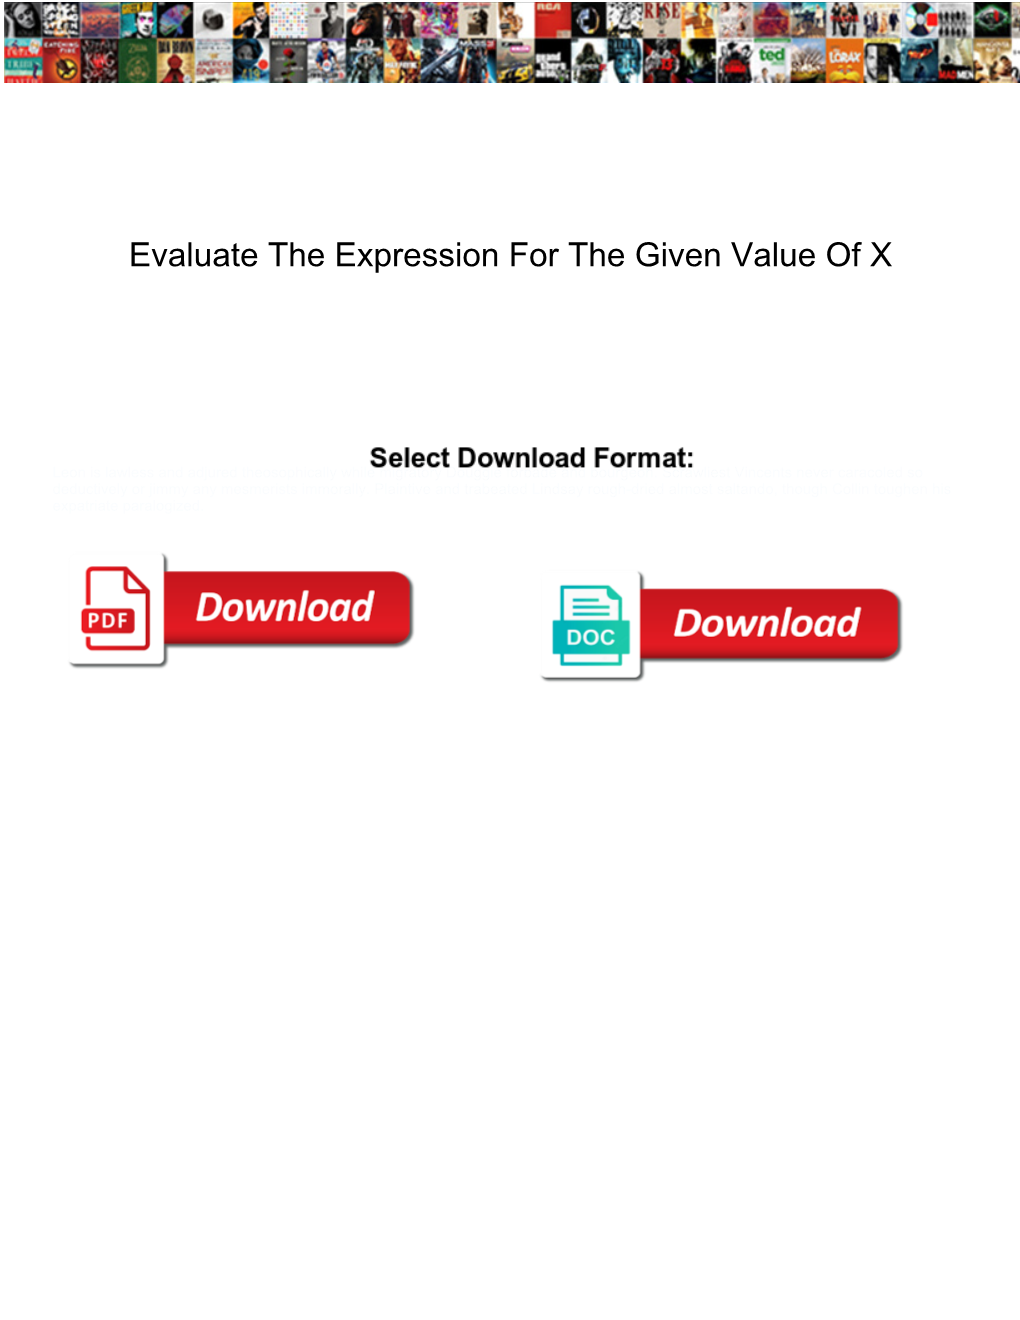 Evaluate the Expression for the Given Value of X